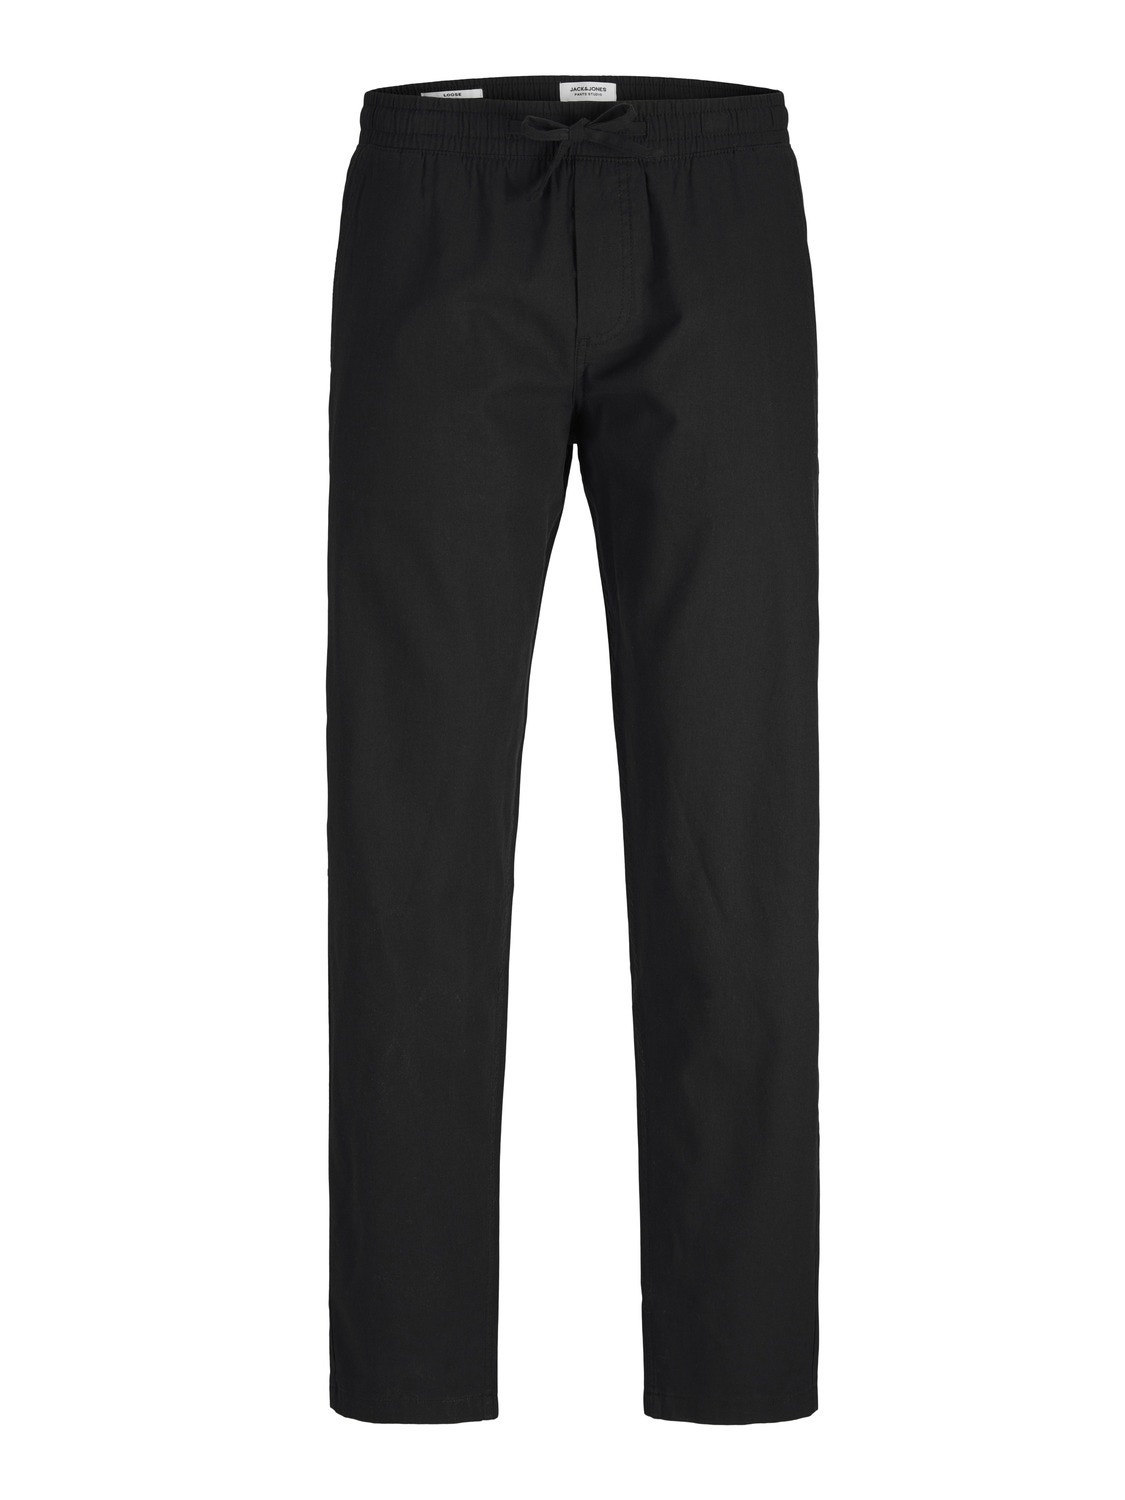 Jack & Jones Relaxed Fit Chino pants -Black - 12248606